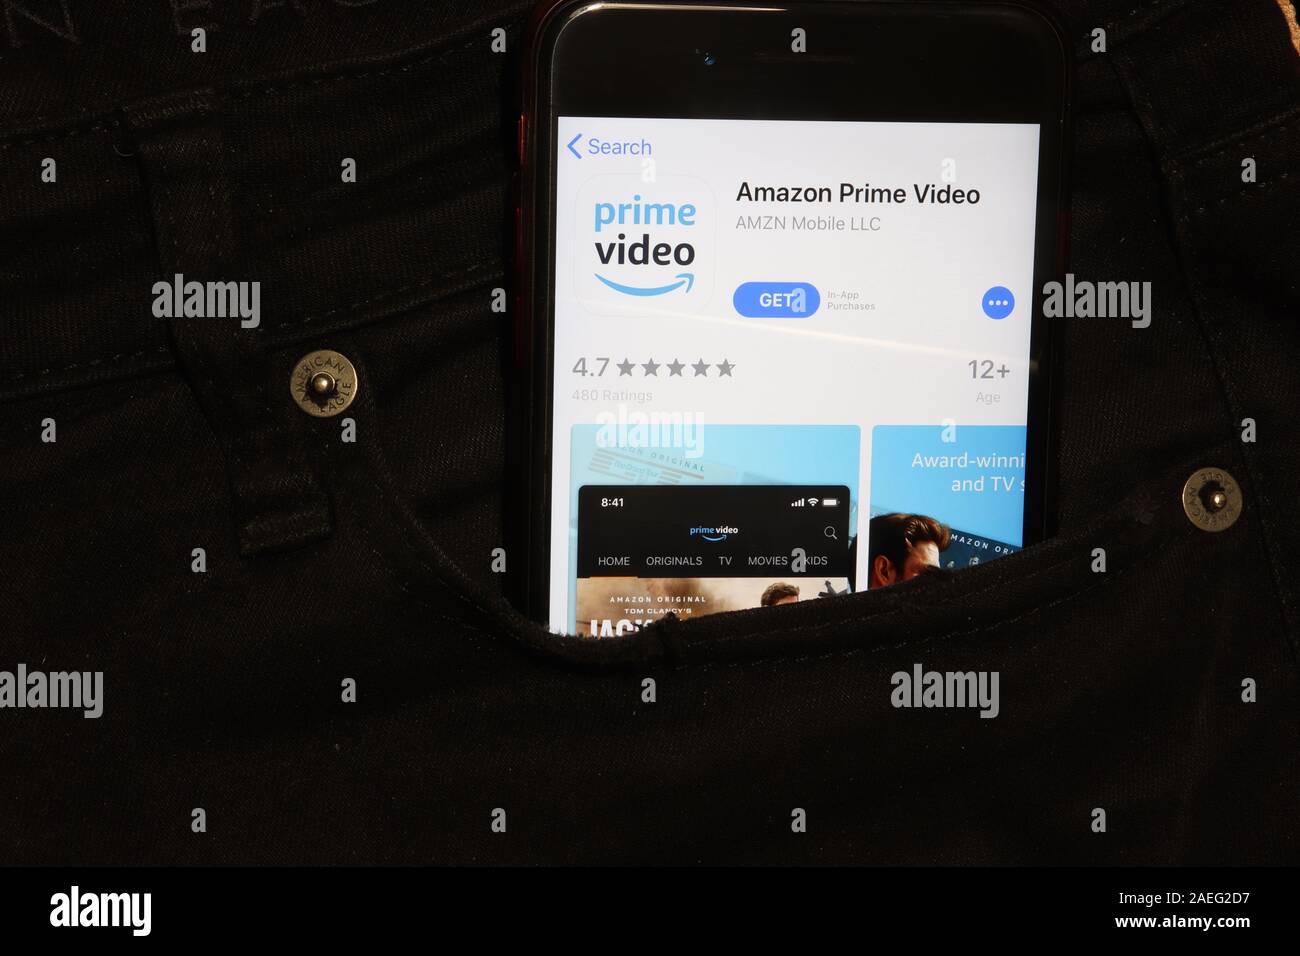 Saint-Petersburg, Russia - 6 December 2019: Mobile phone screen with Amazon Prime Video icon in pocket close-up, Illustrative Editorial. Stock Photo